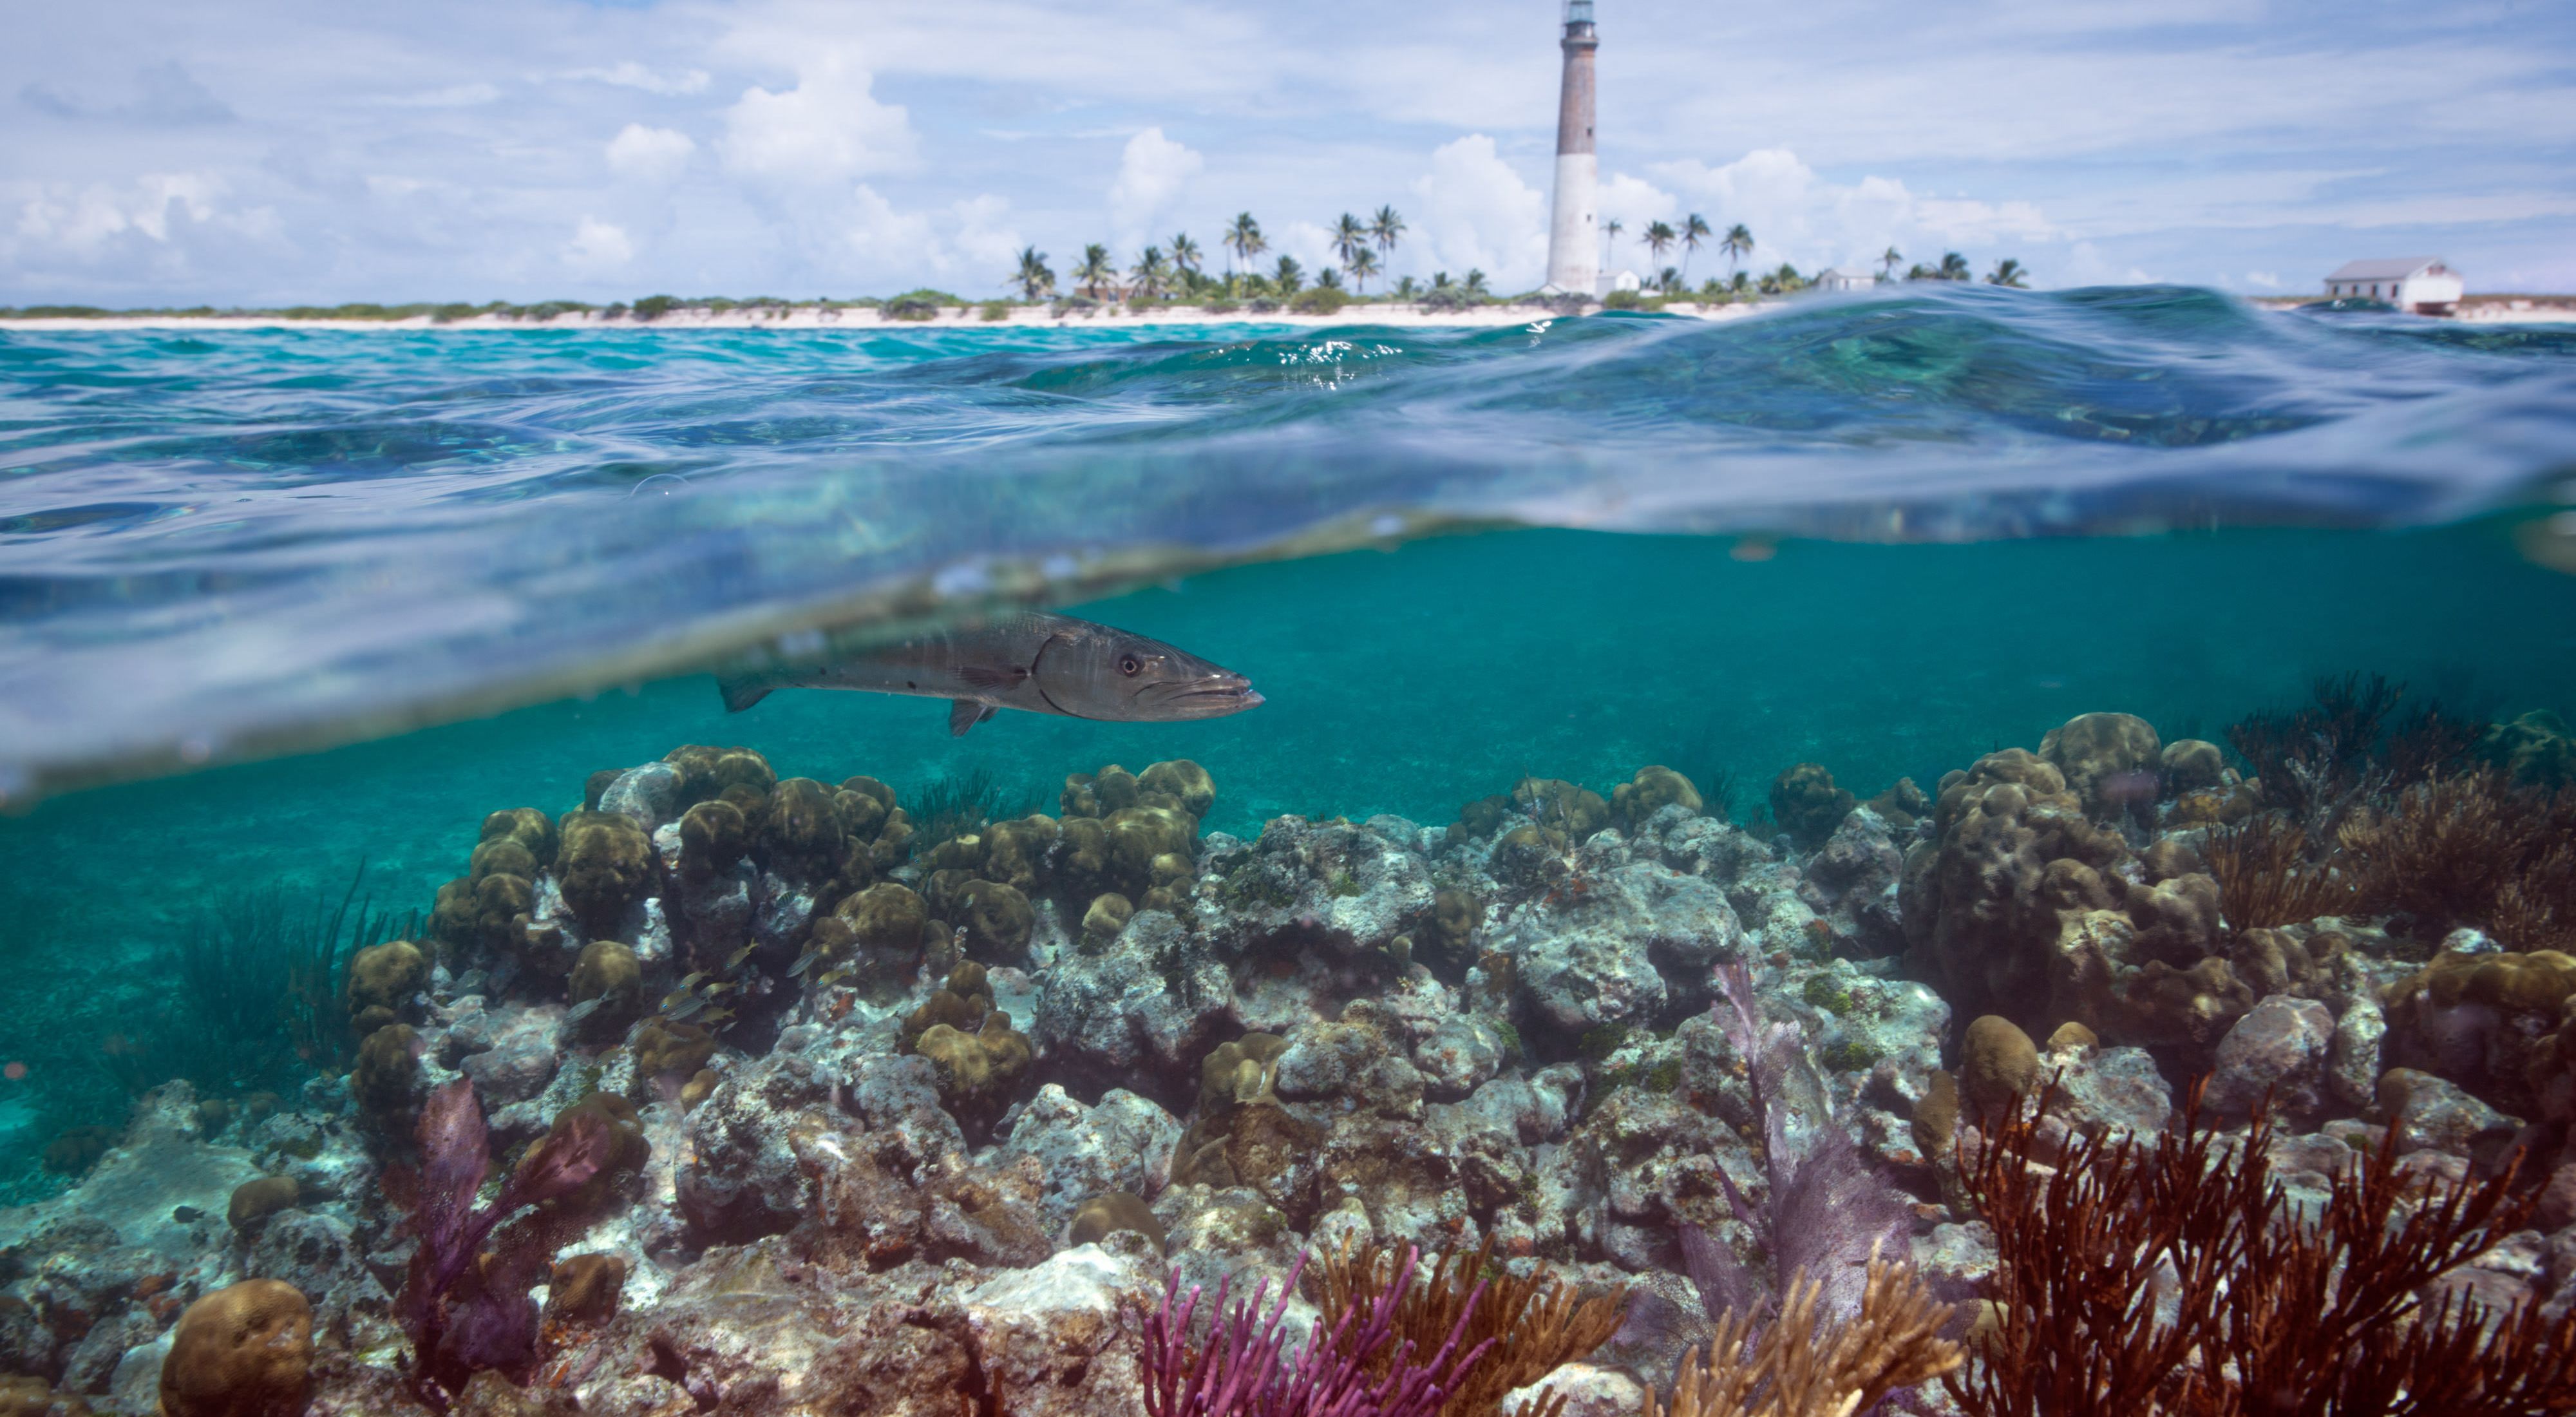 A fish swims over coral reefs with a lighthouse and palm trees visible on land.